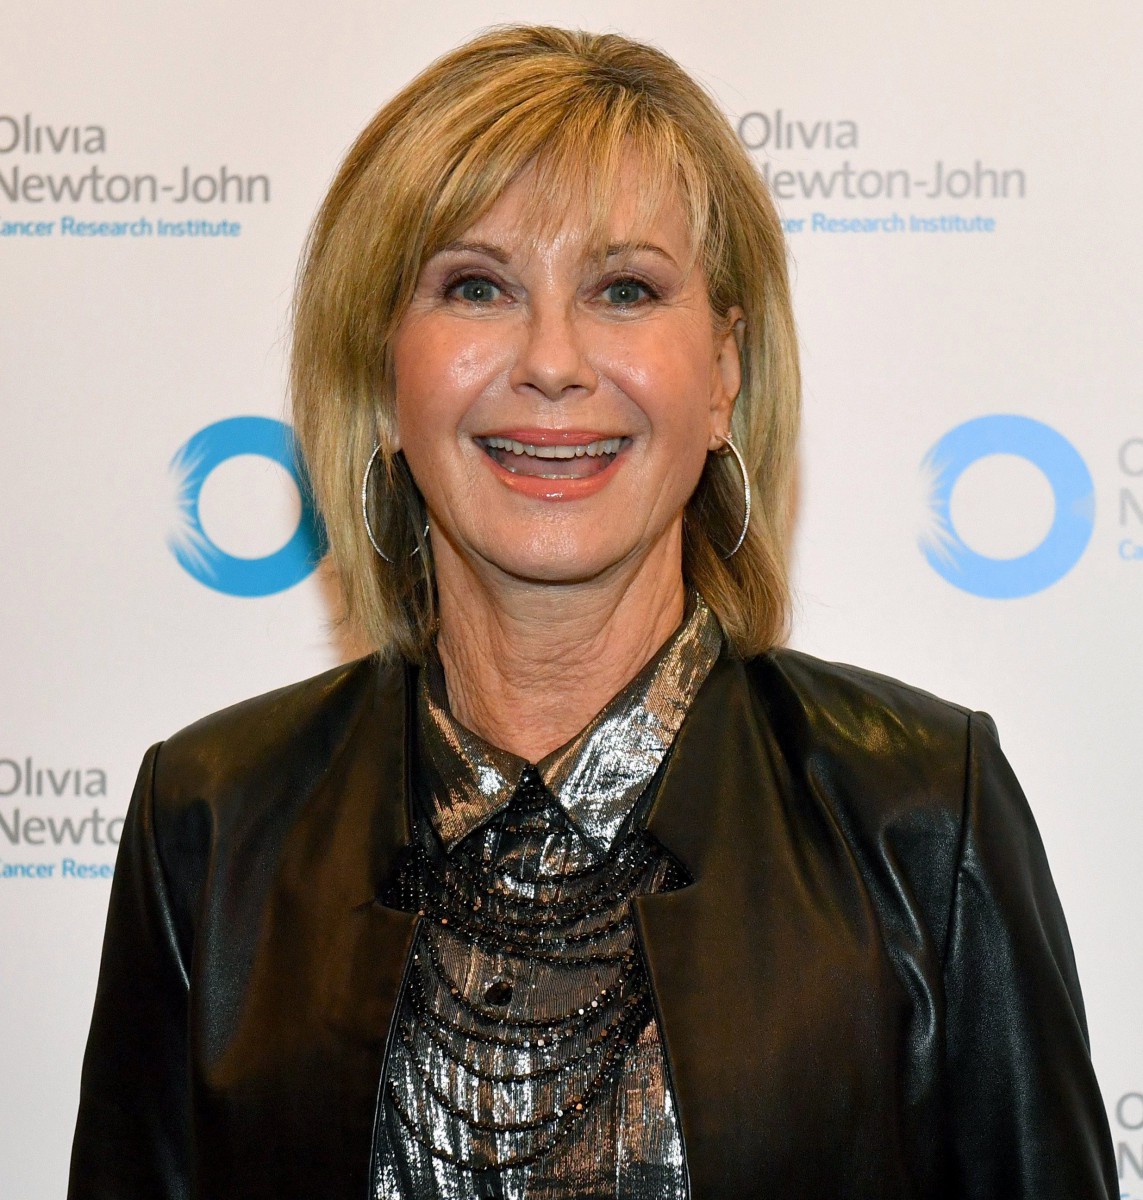 Olivia Newton-John has been made a Dame in a star-studded New Year's Honour list